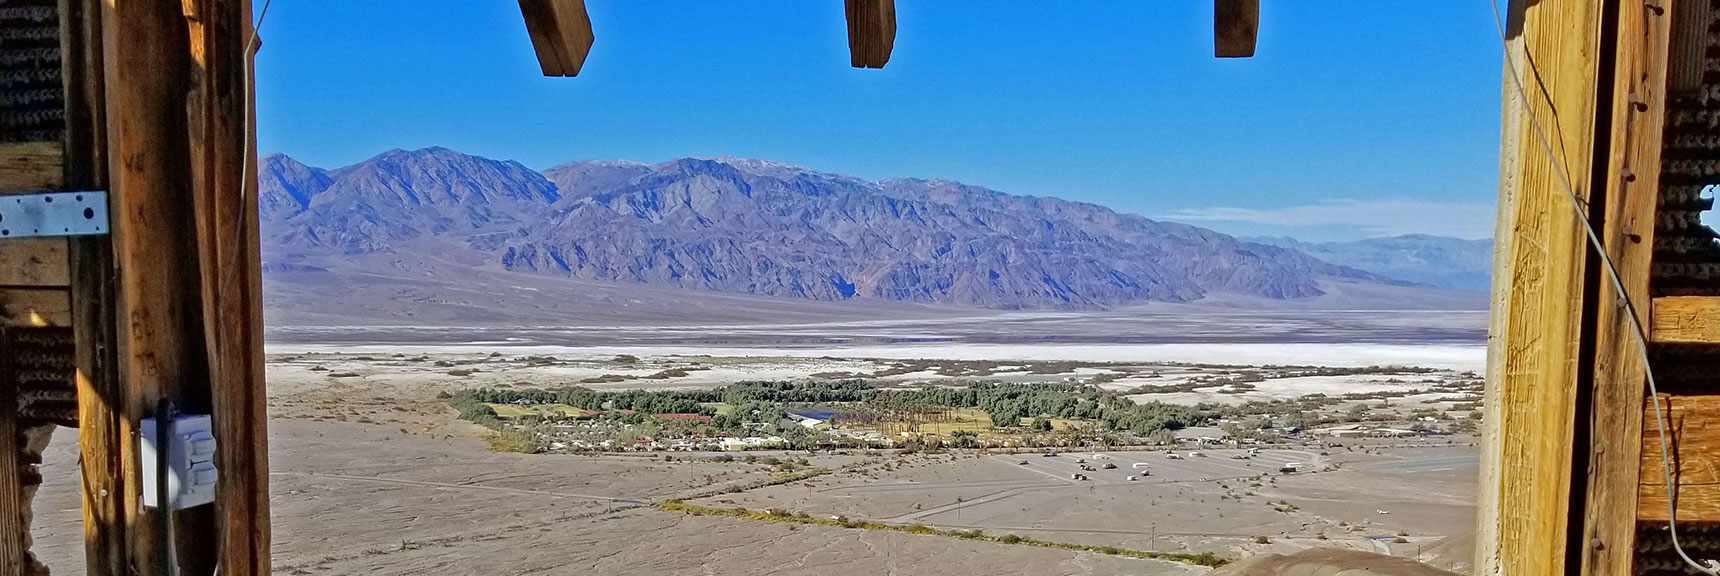 Furnace Creek Ranch and Panamint Mountains Viewed from Within the Tea House | Tea House & Table Rock Circuit | Furnace Creek | Death Valley National Park, California